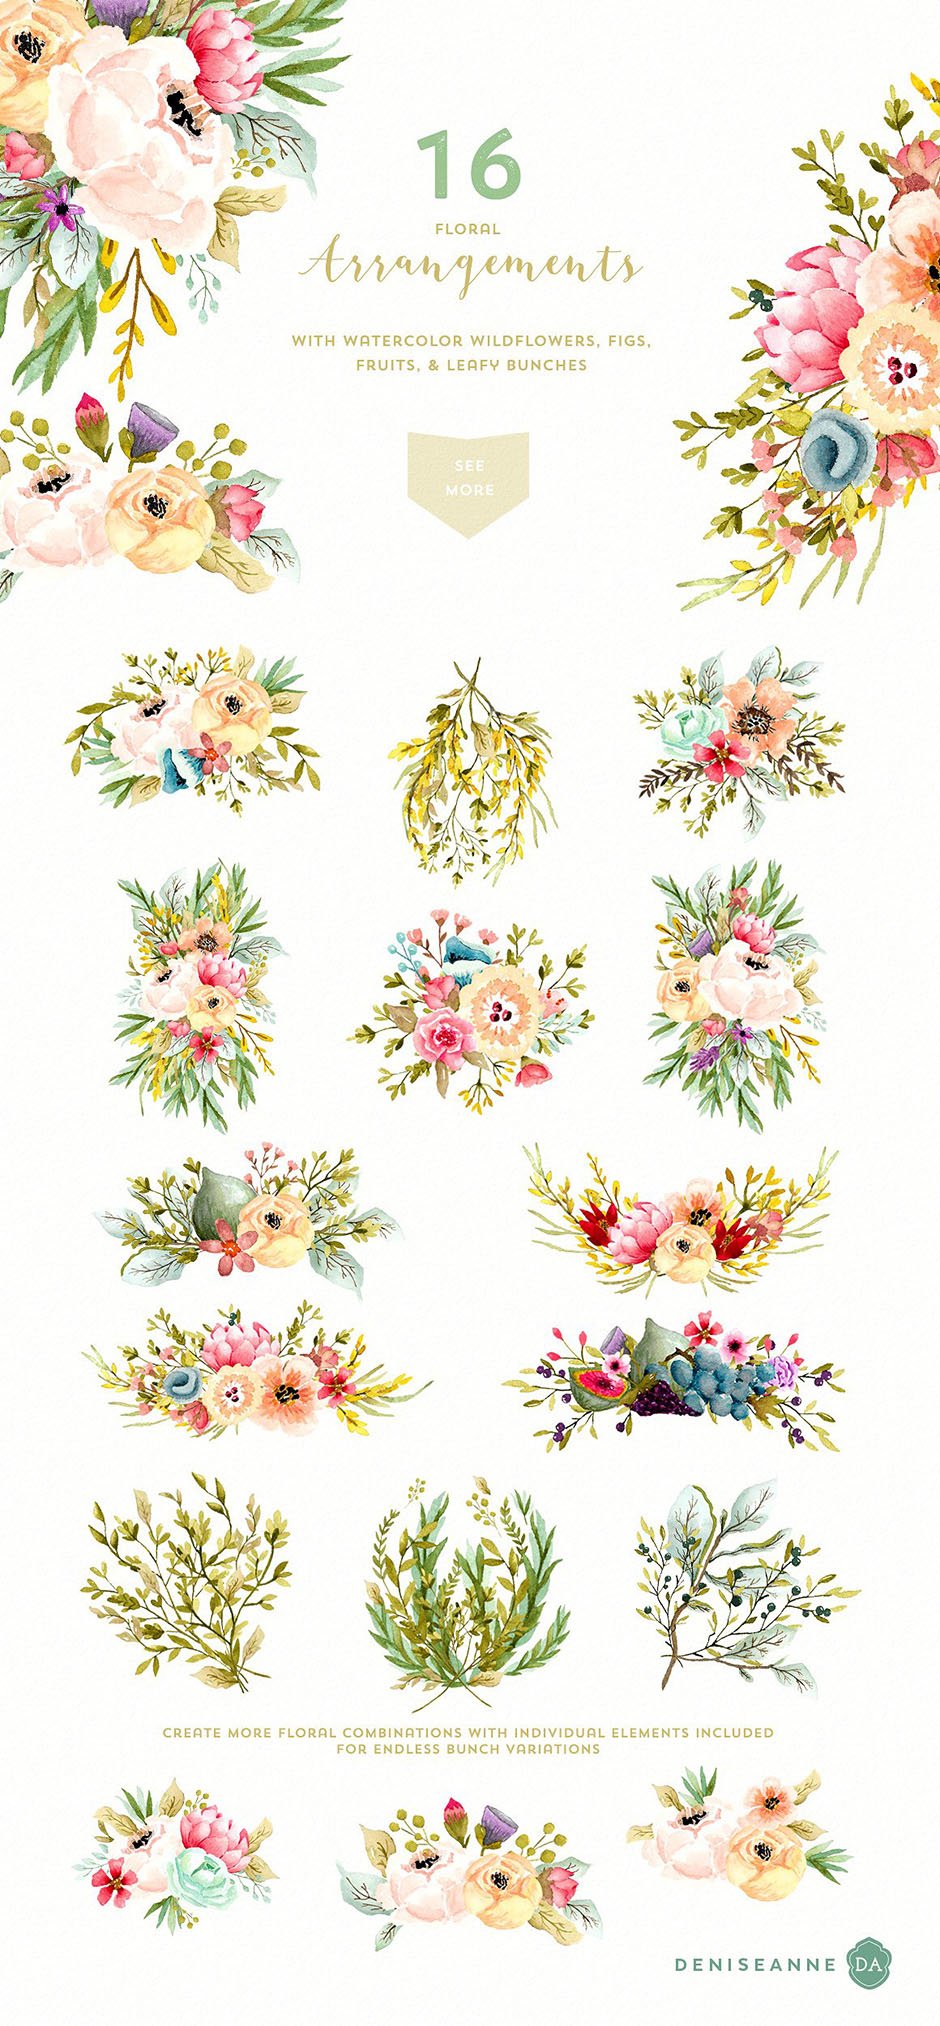 Mountainside Meadows Wildflowers: Floral Illustrations